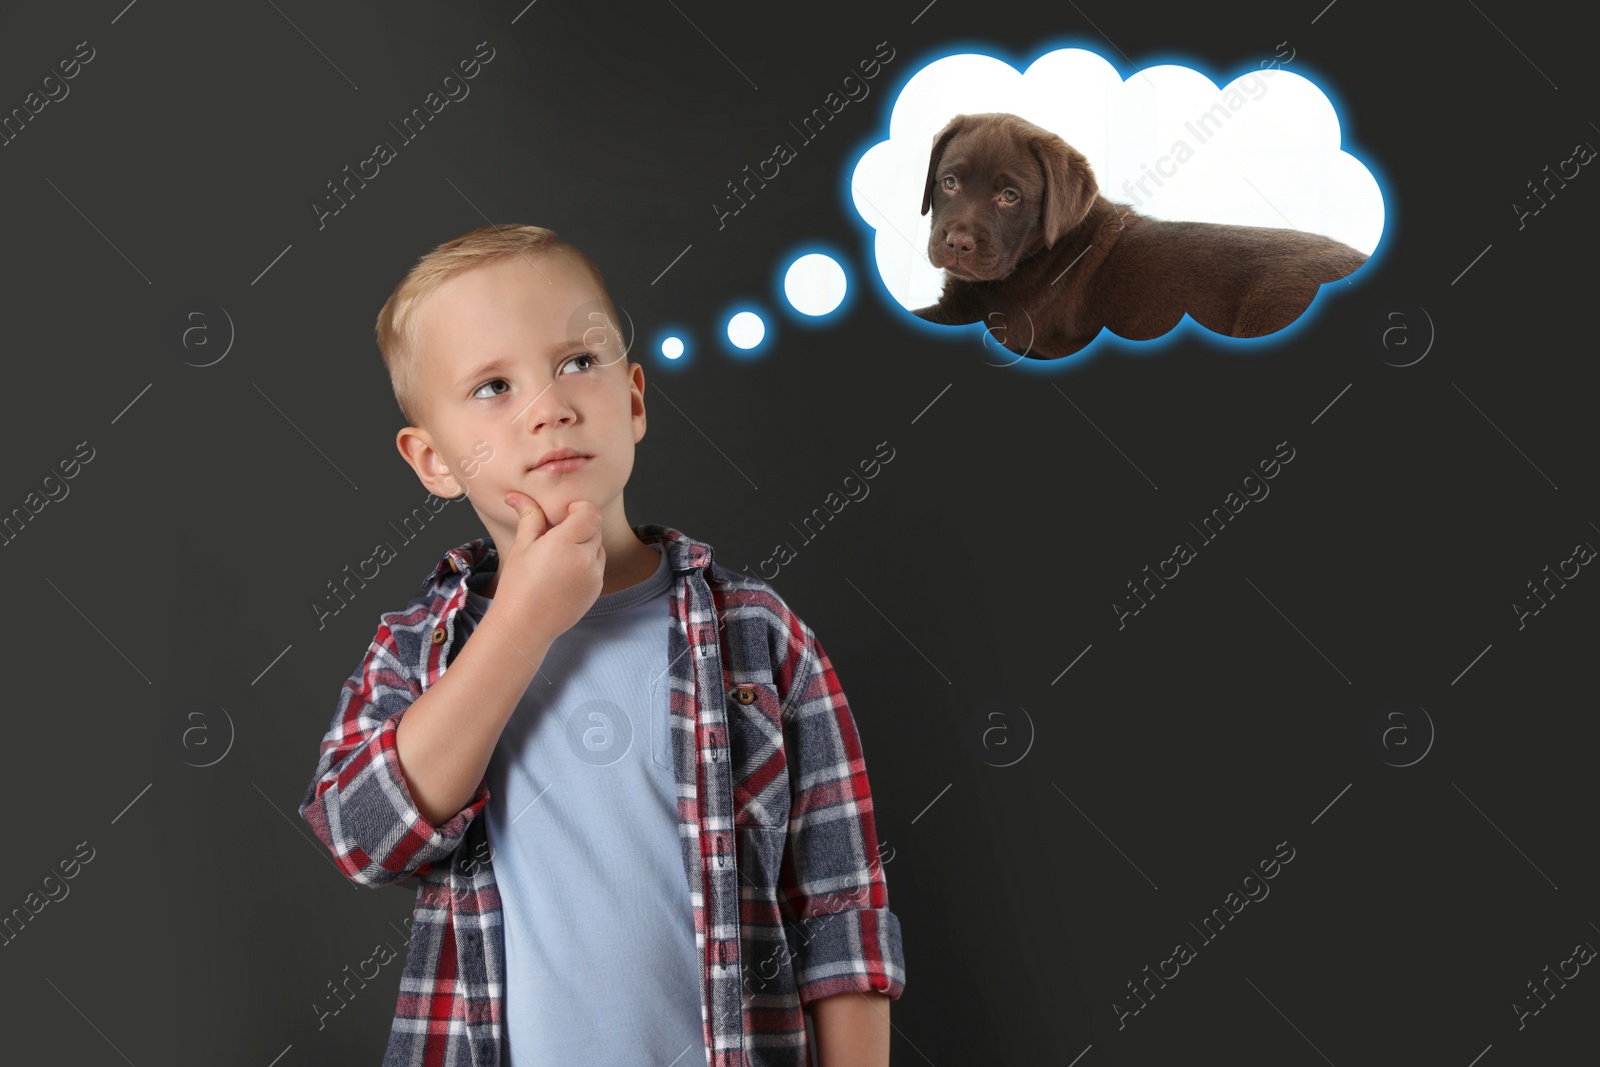 Image of Little boy dreaming about cute puppy, dark background